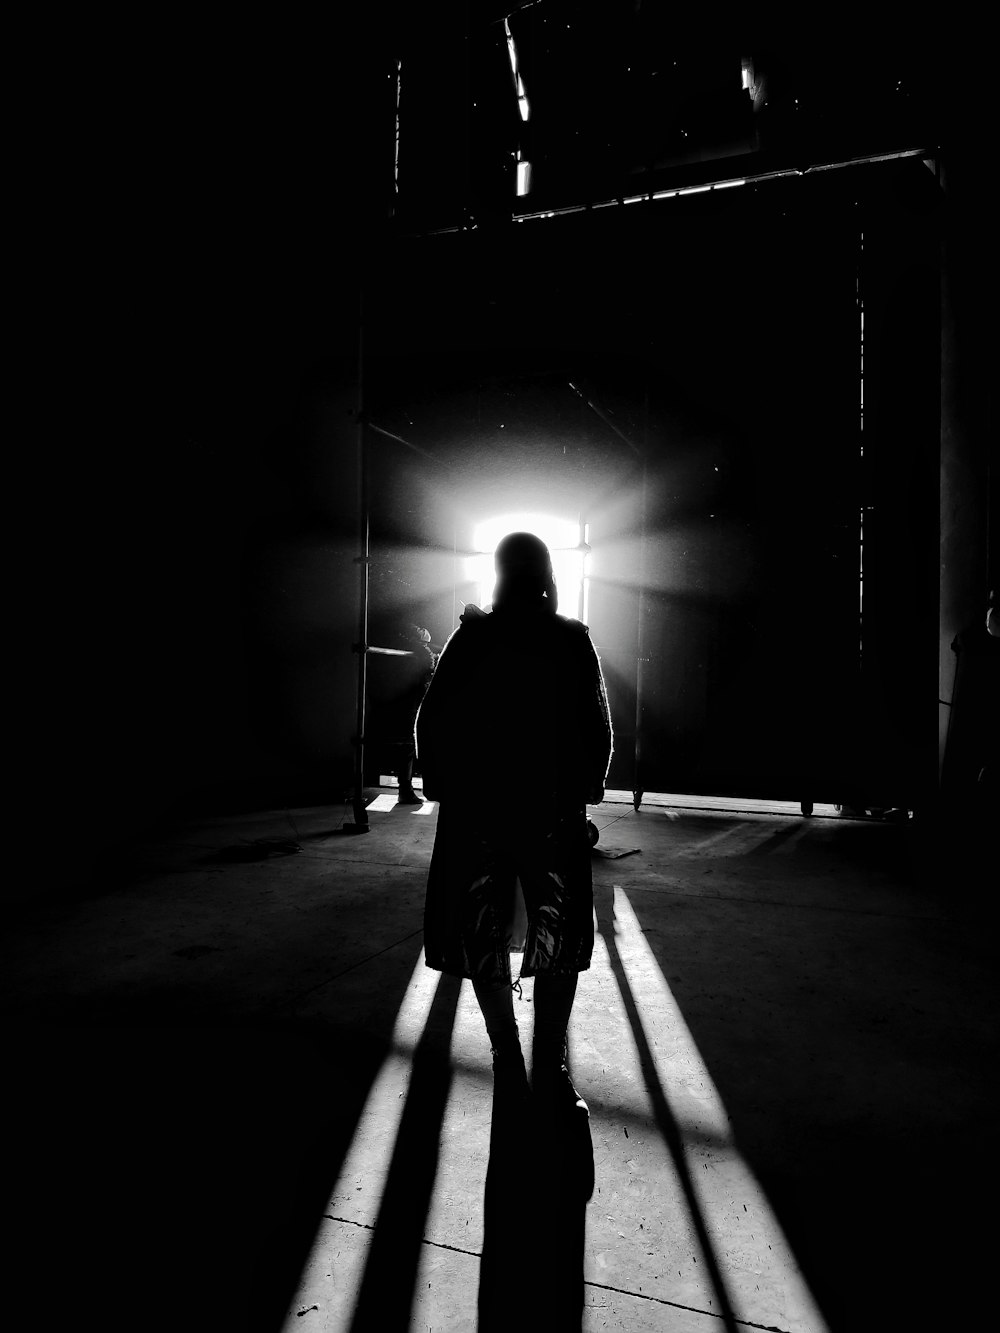 a person standing in a dark room with a suitcase